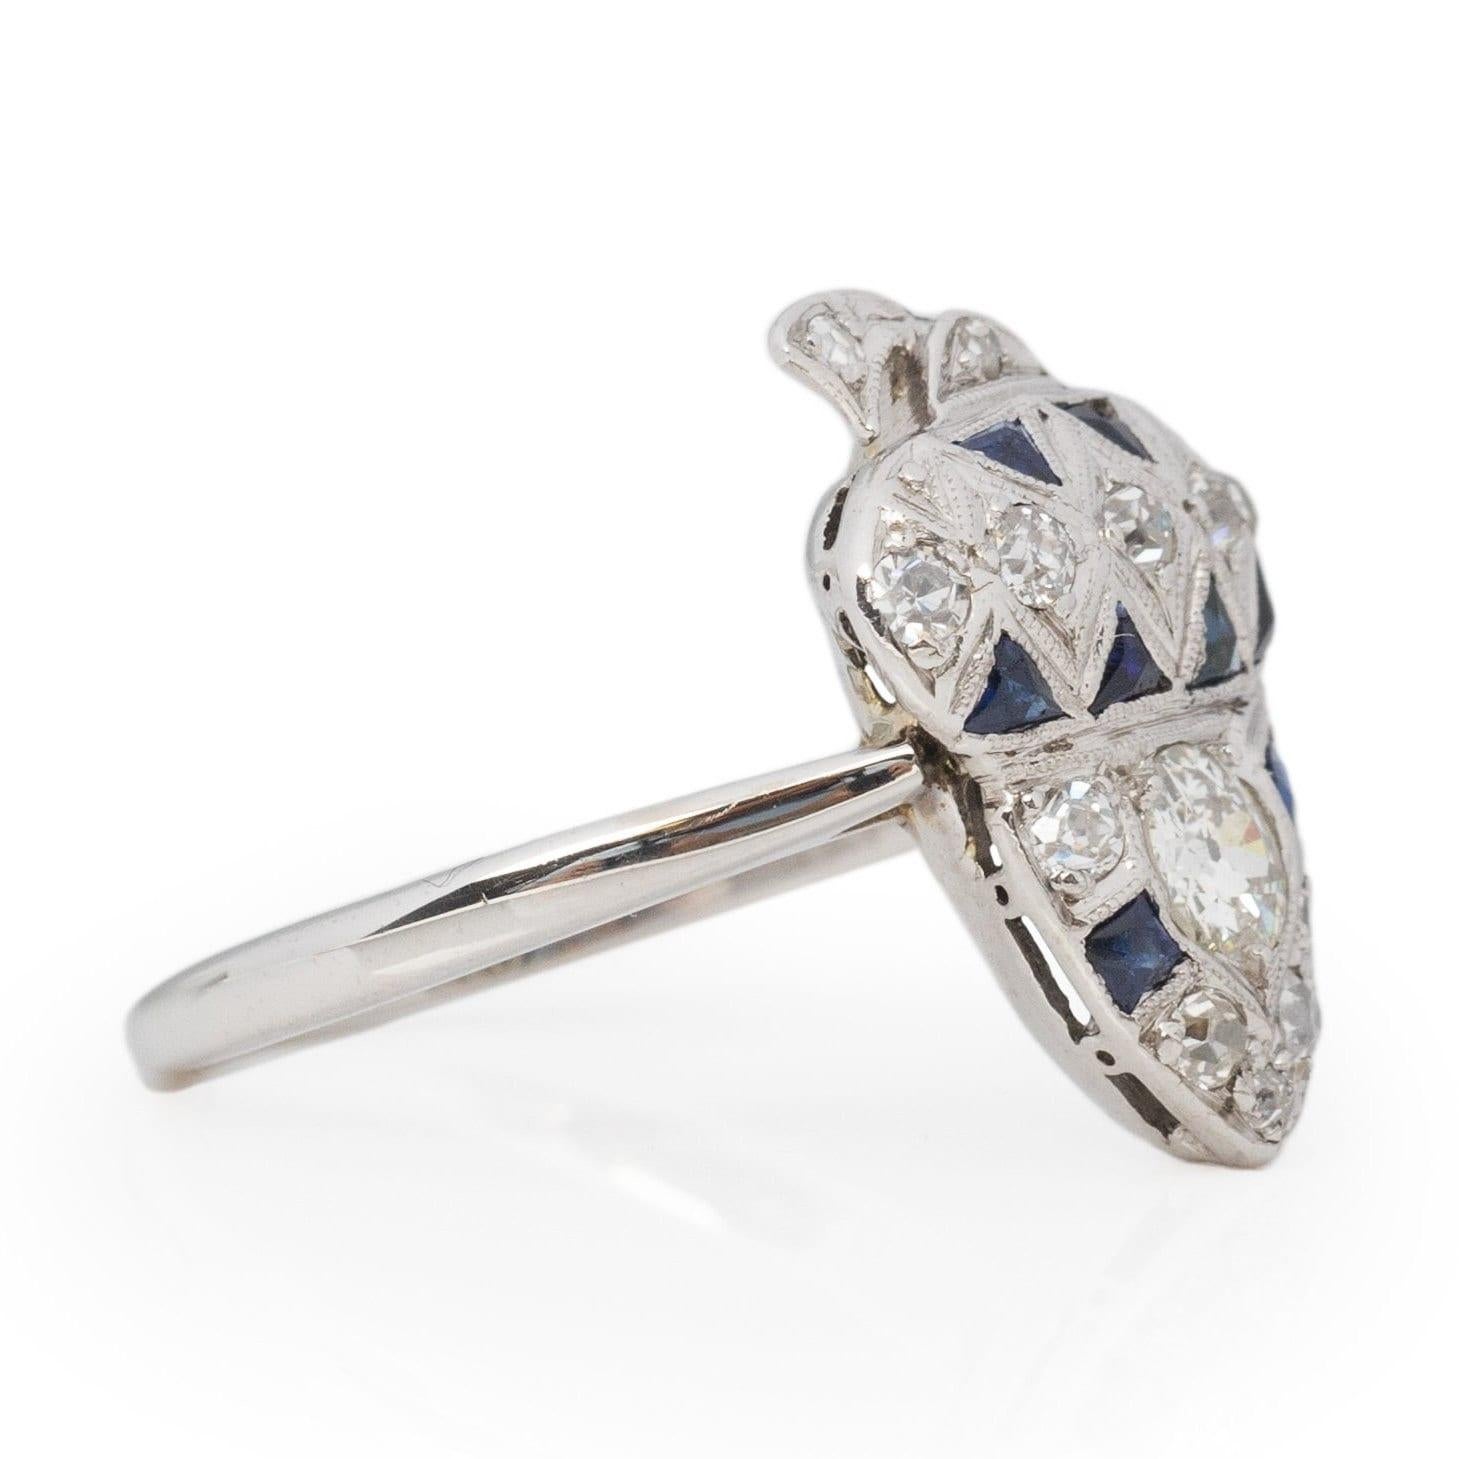 This extraordinary treasure exudes an enchanting charm. Meticulously fashioned from 14K white gold, the understated yet timeless band cradles a dazzling acorn embellished with an array of glistening gemstones. At its core lies a magnificent old